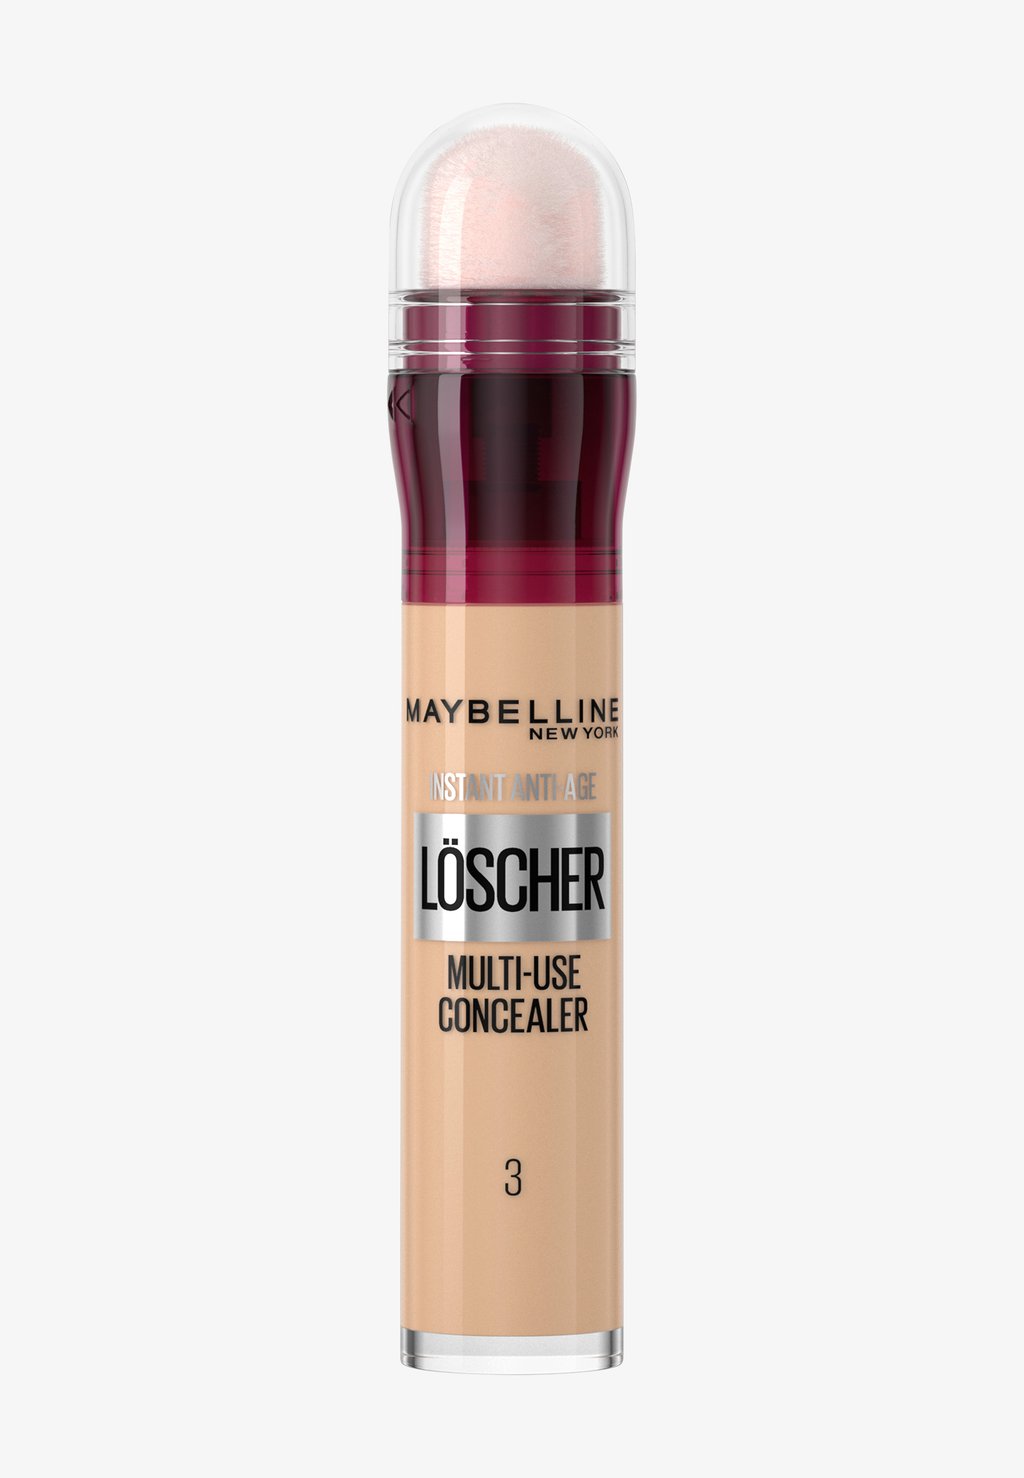 Консилер INSTANT CONCEALER Maybelline New York, цвет 03 fair maybelline new york concealer instant age rewind 03 fair